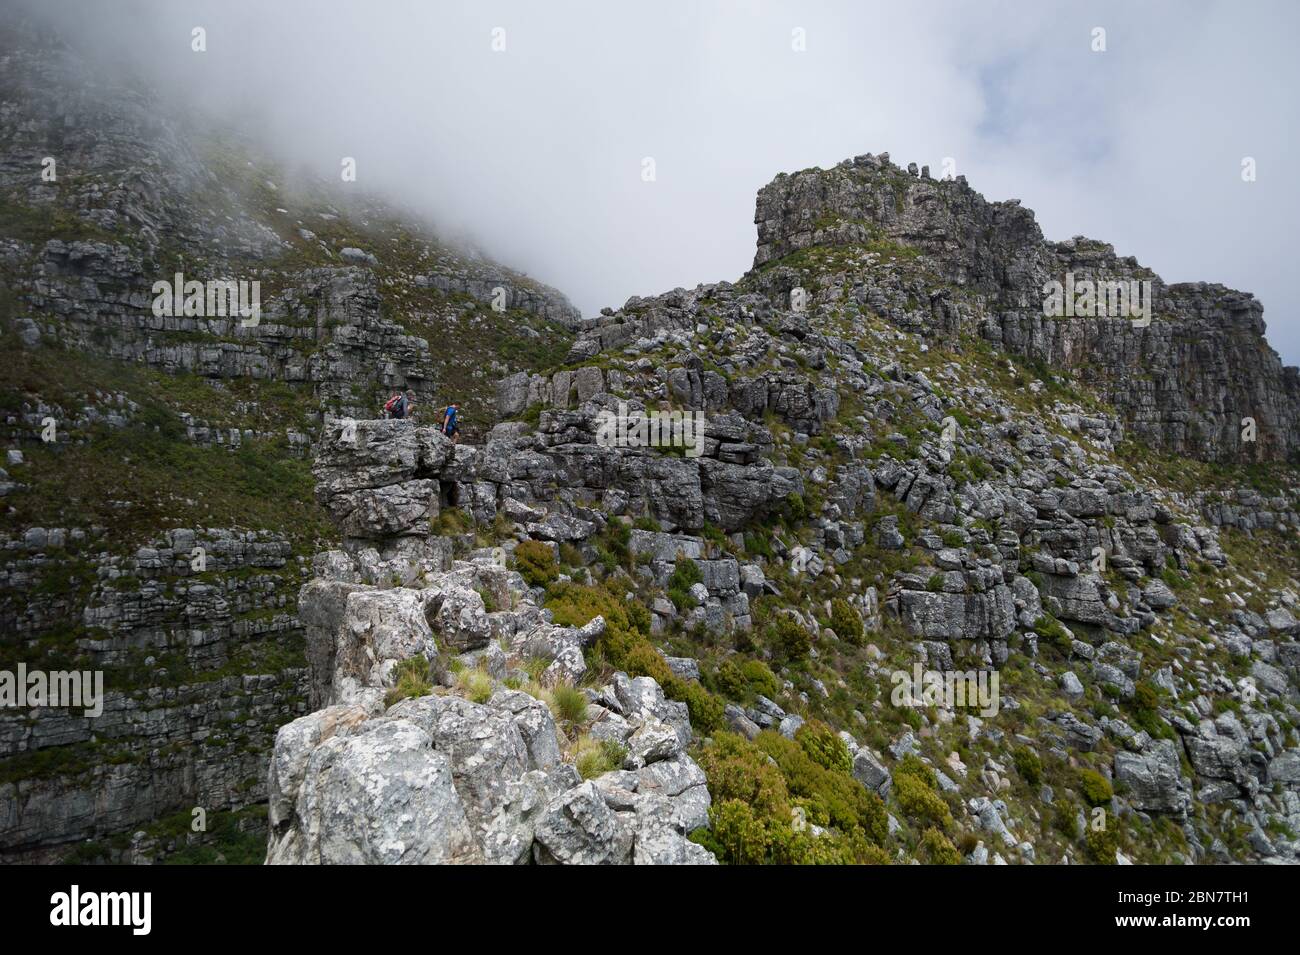 Devils Peak in Table Mountain National Park, Cape Town, South Africa offers urban hiking trails like this route via Mowbray Ridge up Devil's Peak. Stock Photo